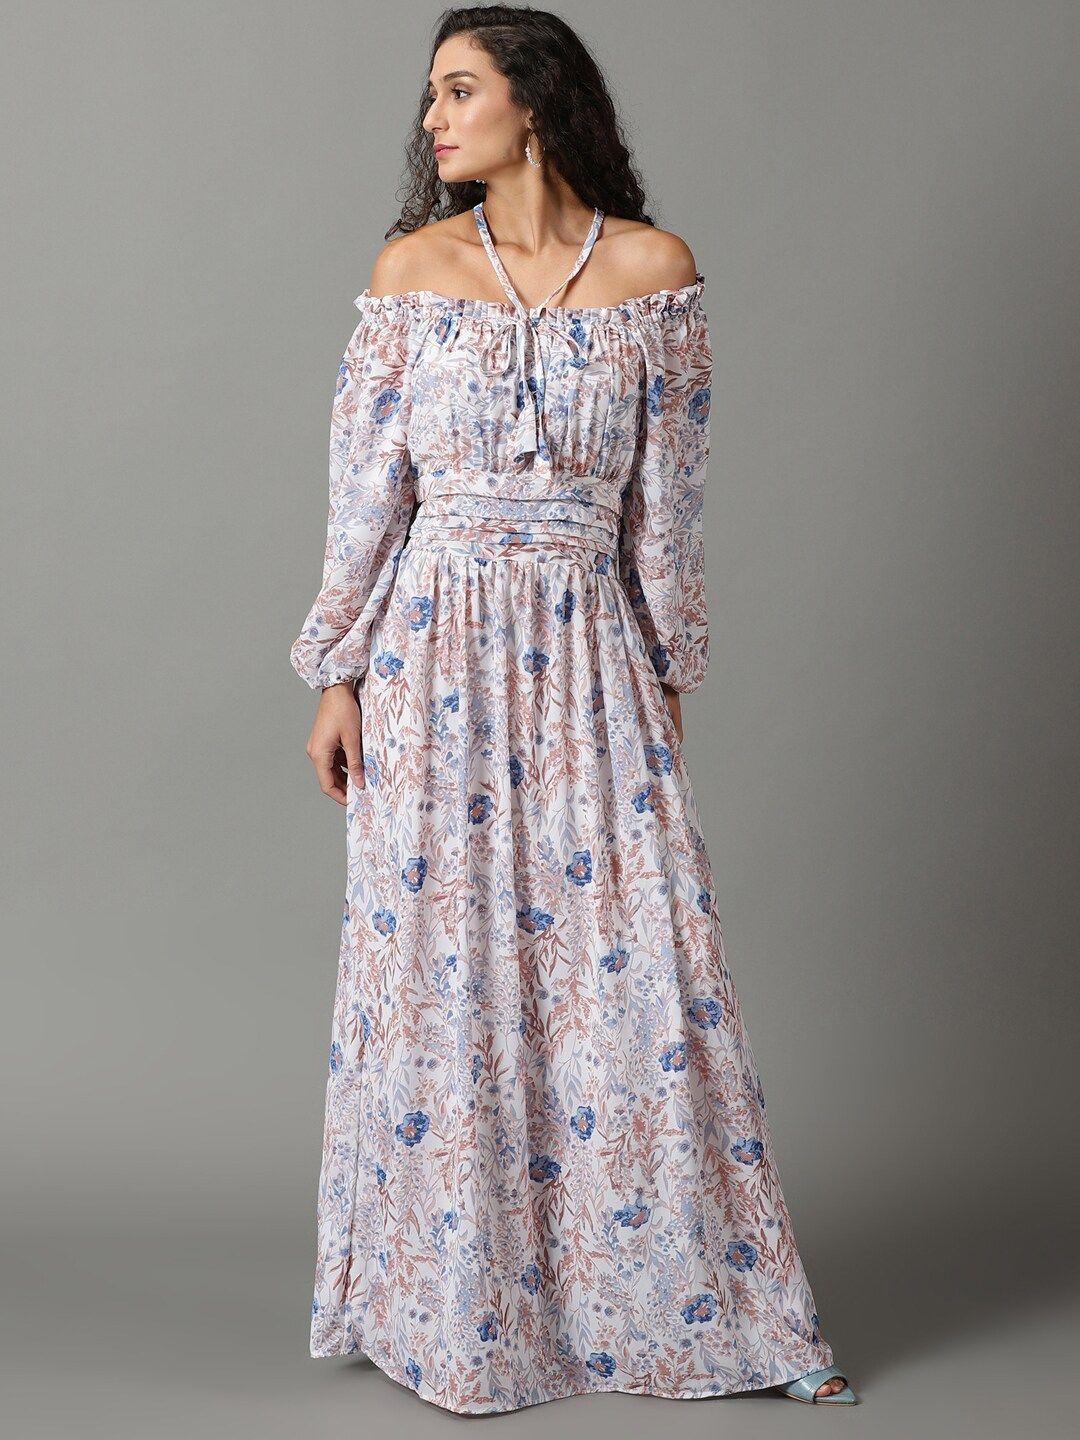 showoff-floral-printed-off-shoulder-puff-sleeves-gathered-fit-&-flare-maxi-dress